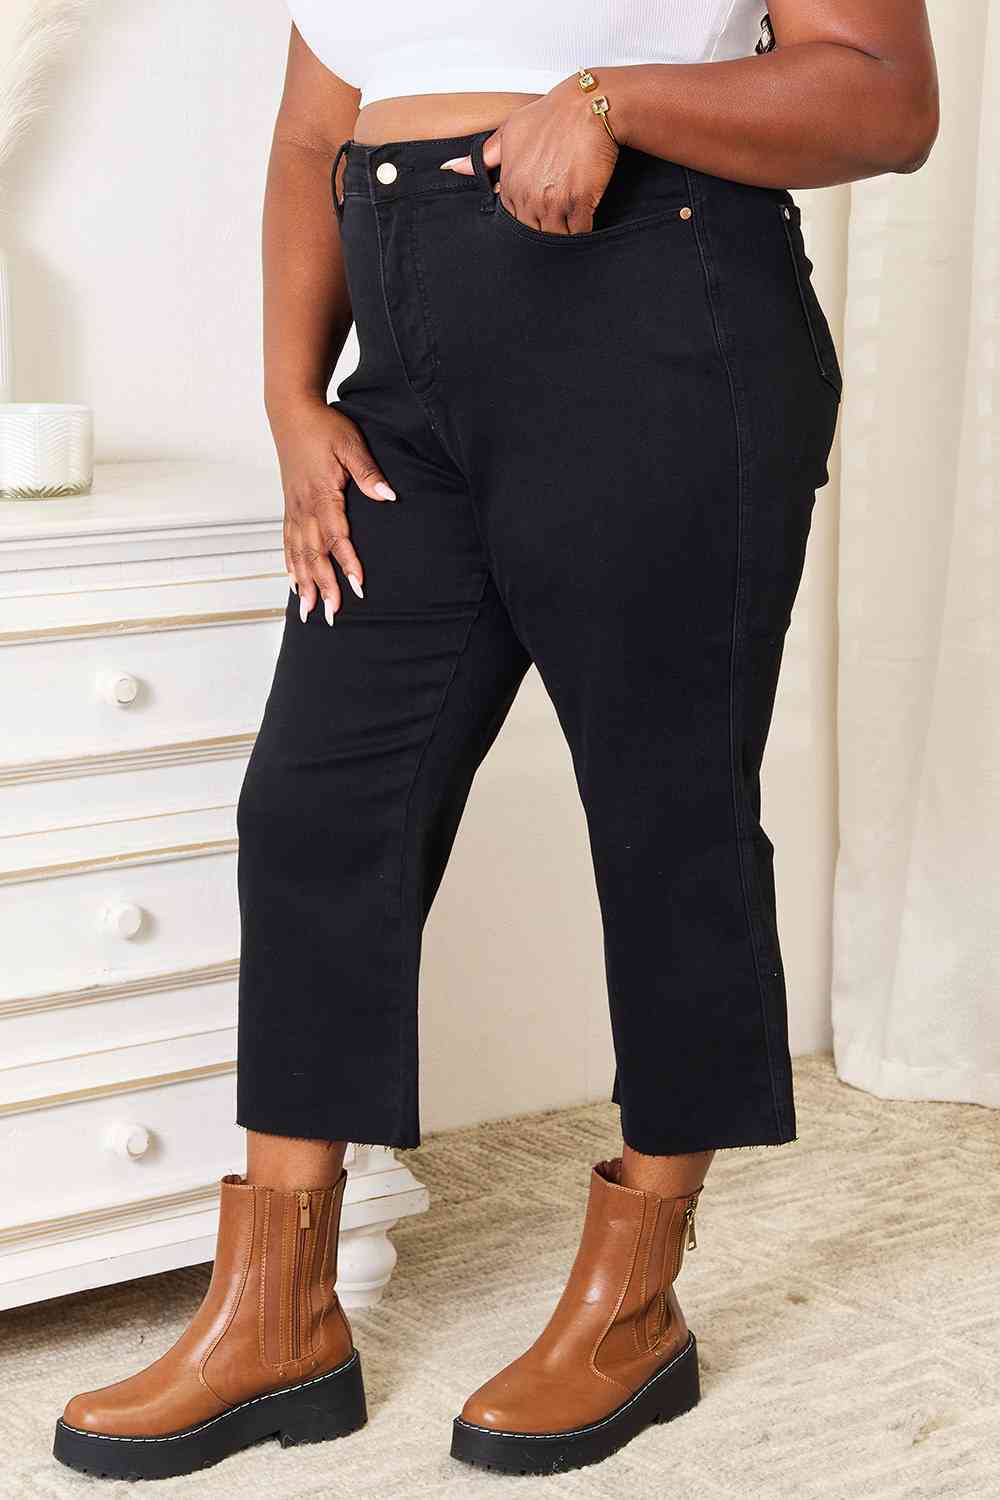 These jeans are a must-have addition to your wardrobe, offering a sleek and sophisticated look with their high waisted design that accentuates your curves. The cropped wide leg adds a touch of flair and versatility, allowing you to pair them effortlessly with both casual and formal outfits. What sets these jeans apart is their clean, no-distressing finish, making them a chic choice for any occasion.